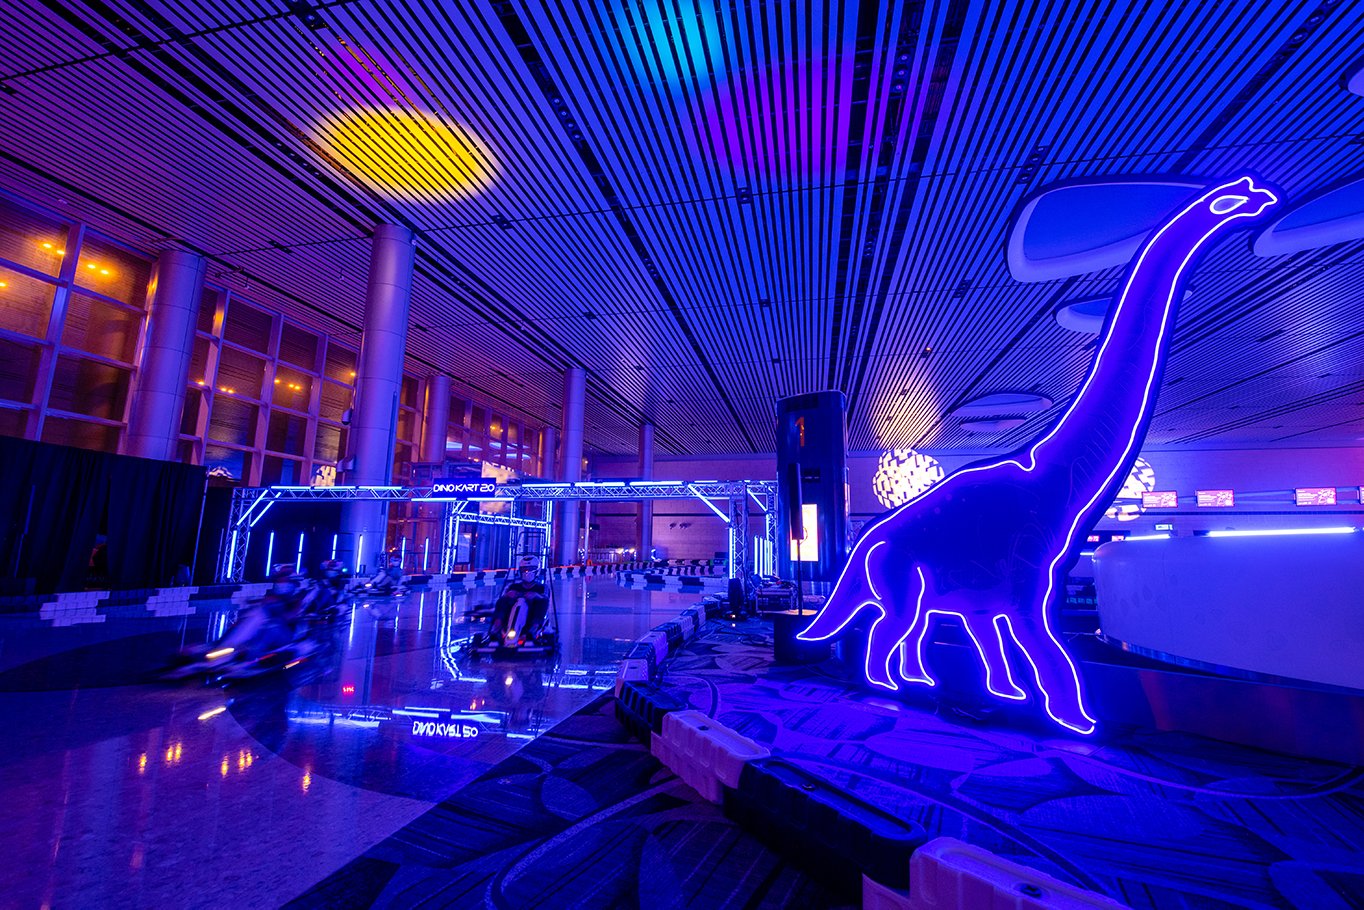 Racer speeding past check-in rows in Terminal 4 Departure Hall at Dino Kart – a dinosaur-themed indoor electric go-kart track with neon lights